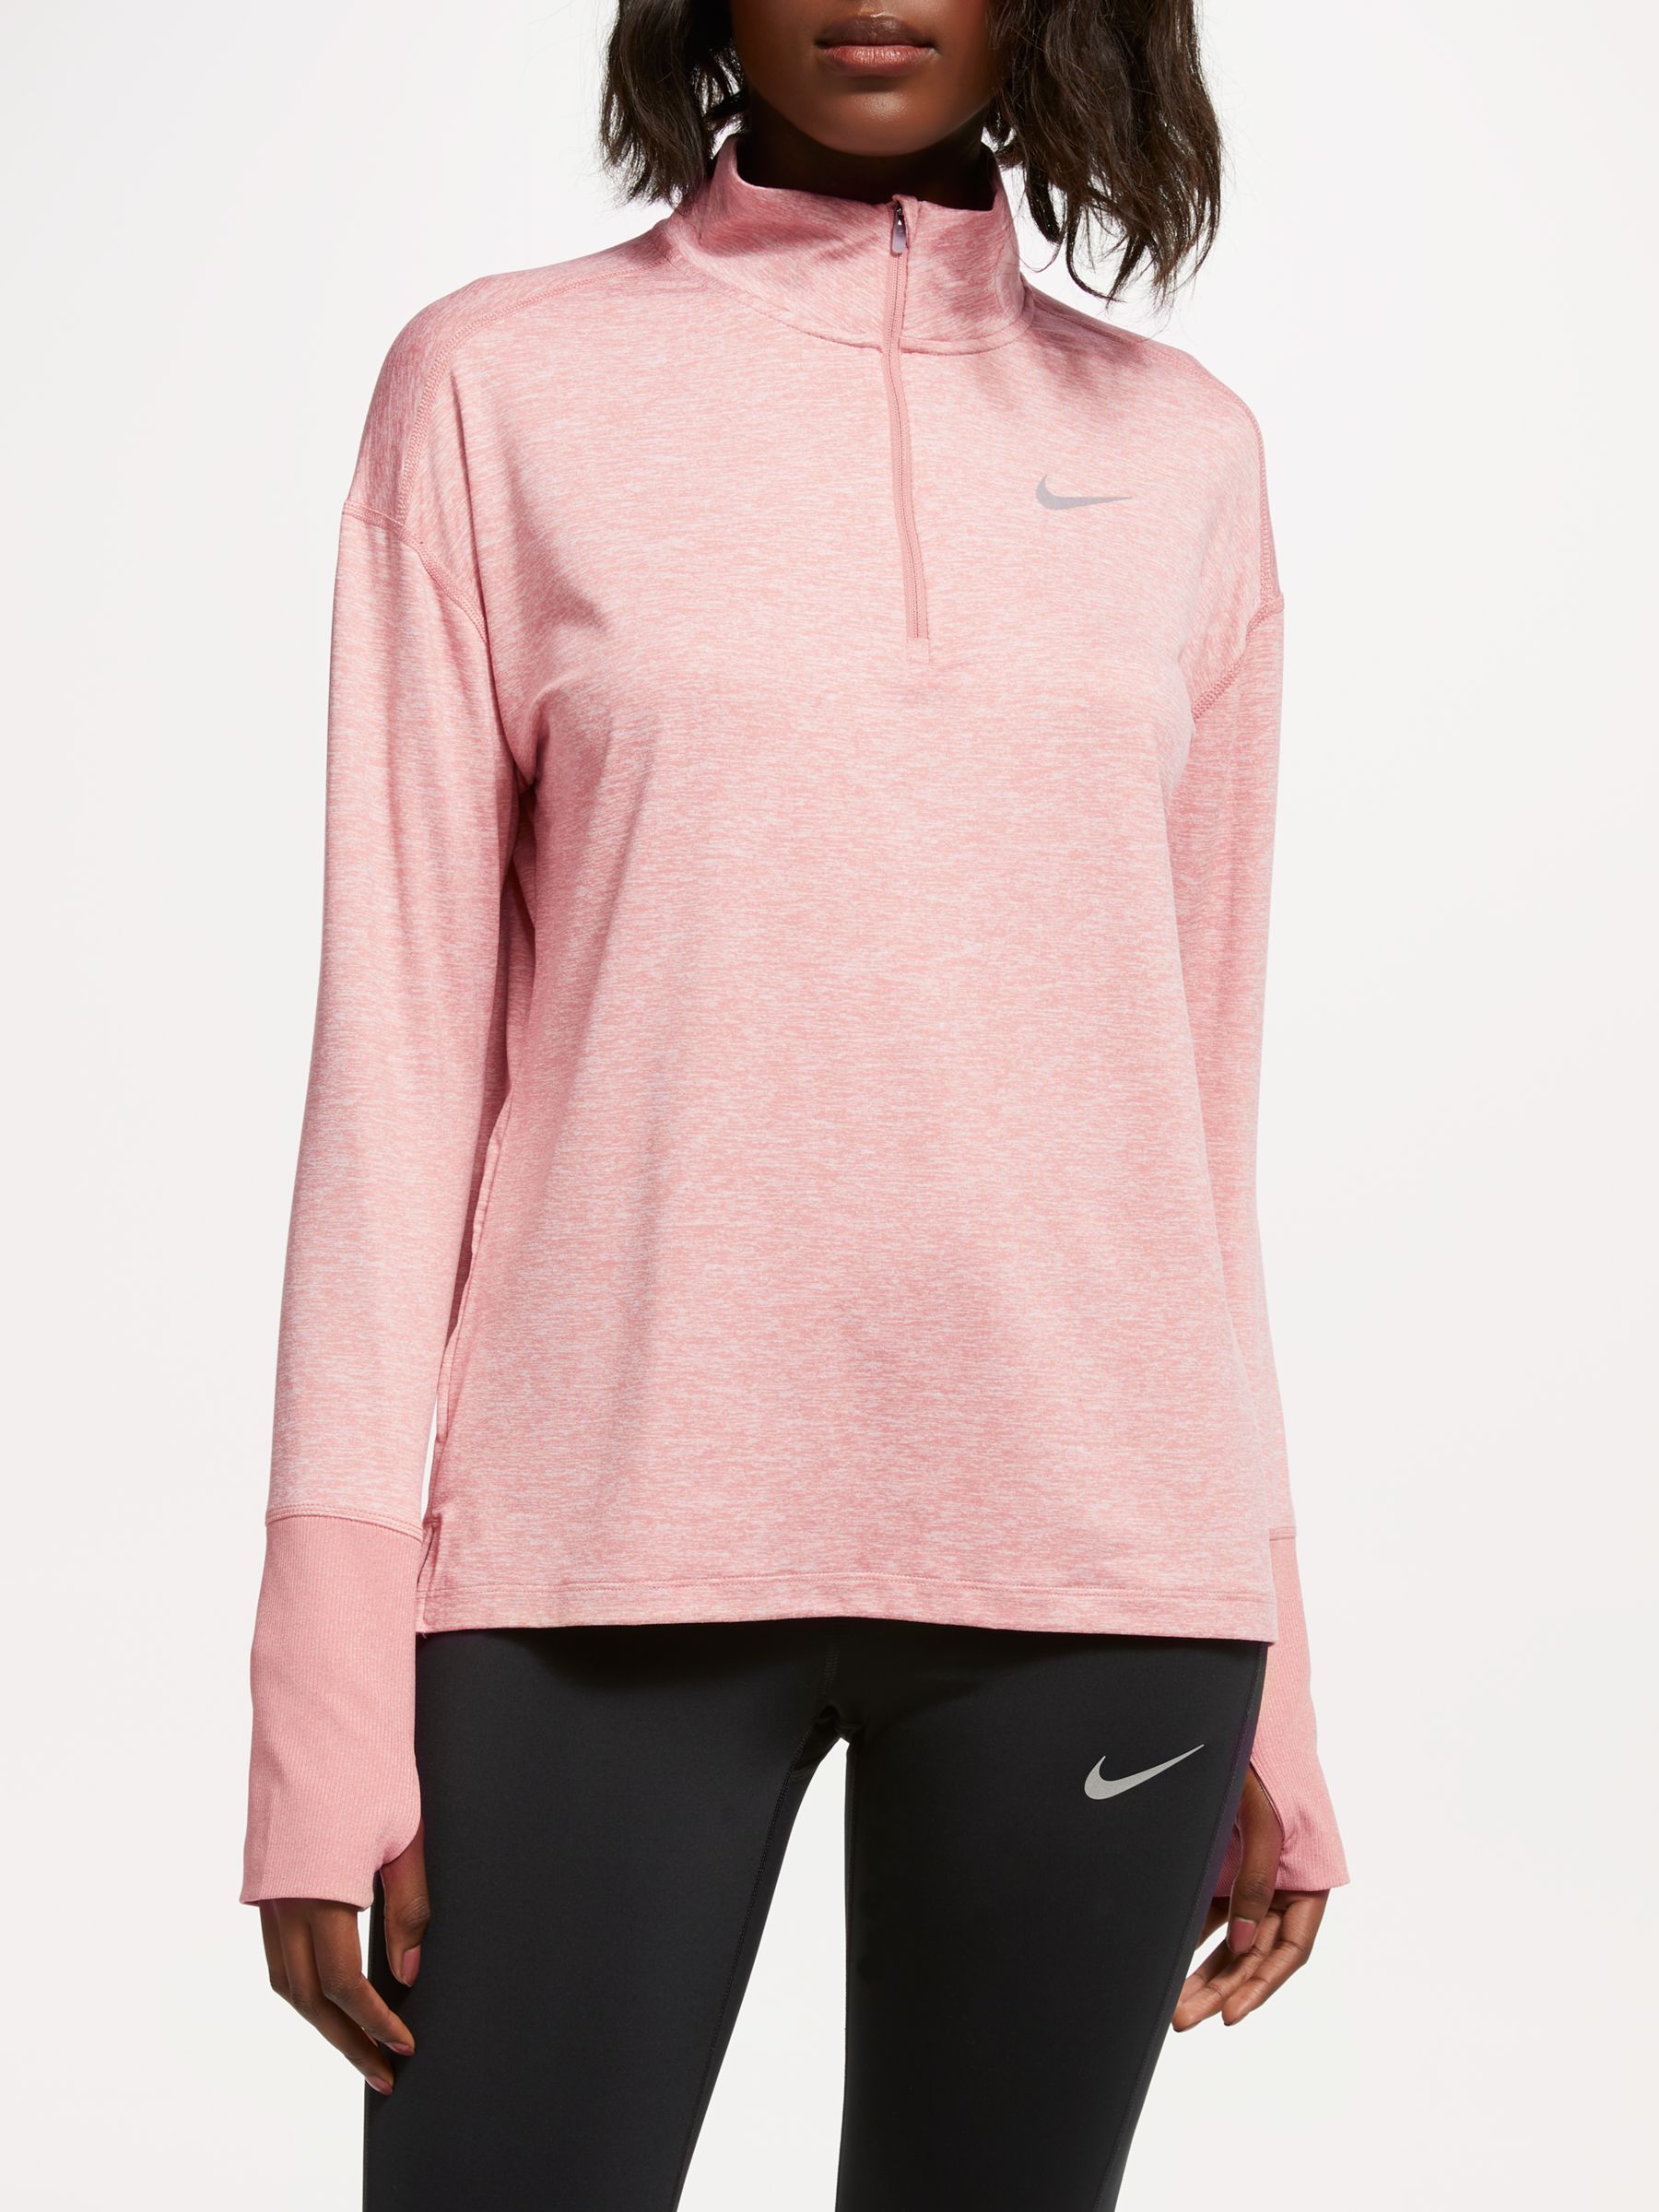 nike dry element running top